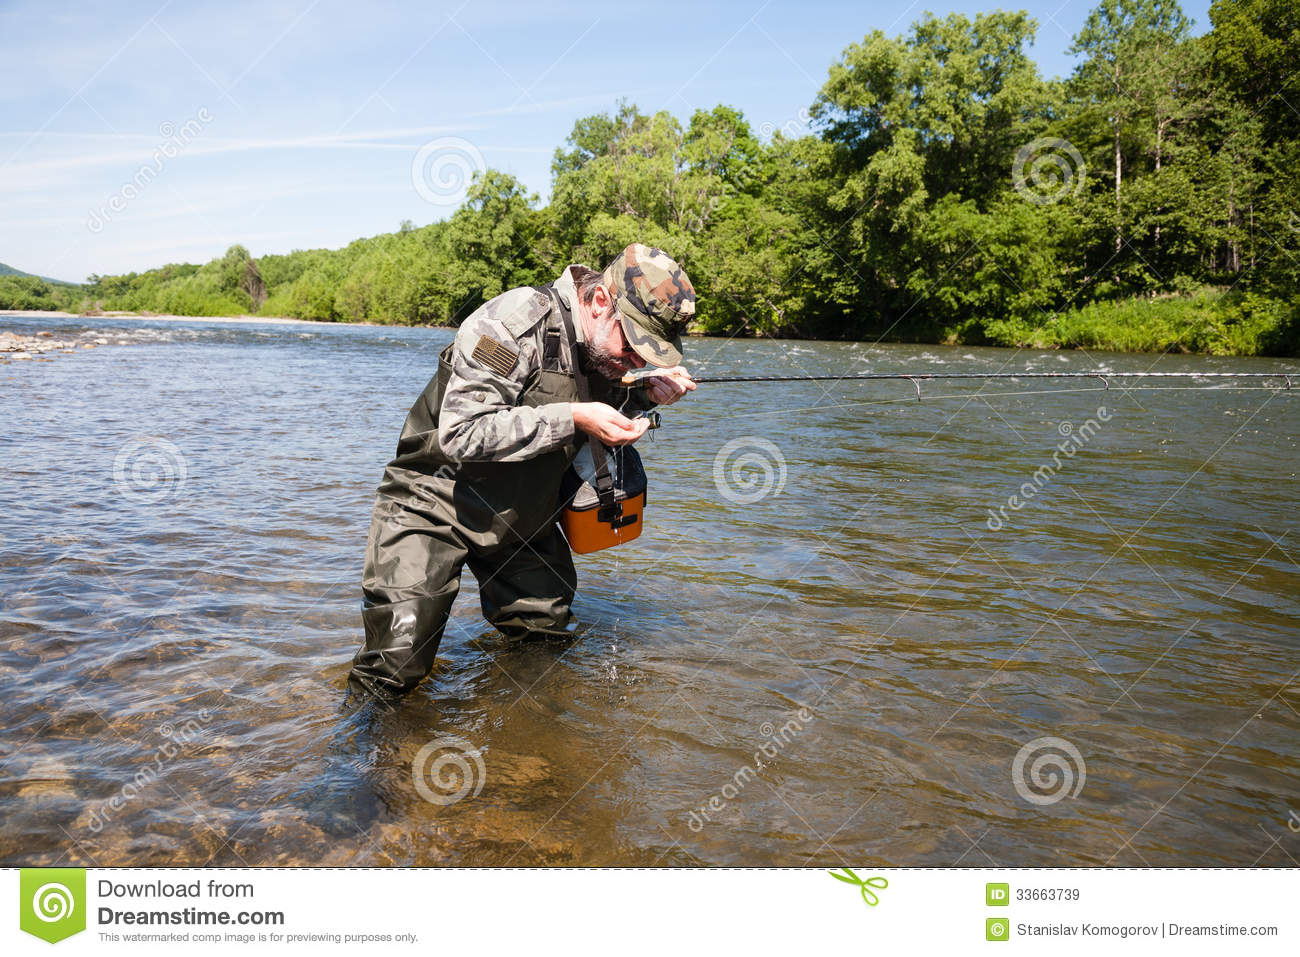 Fisherman Drinking Water From The River Royalty Free Stock Images    